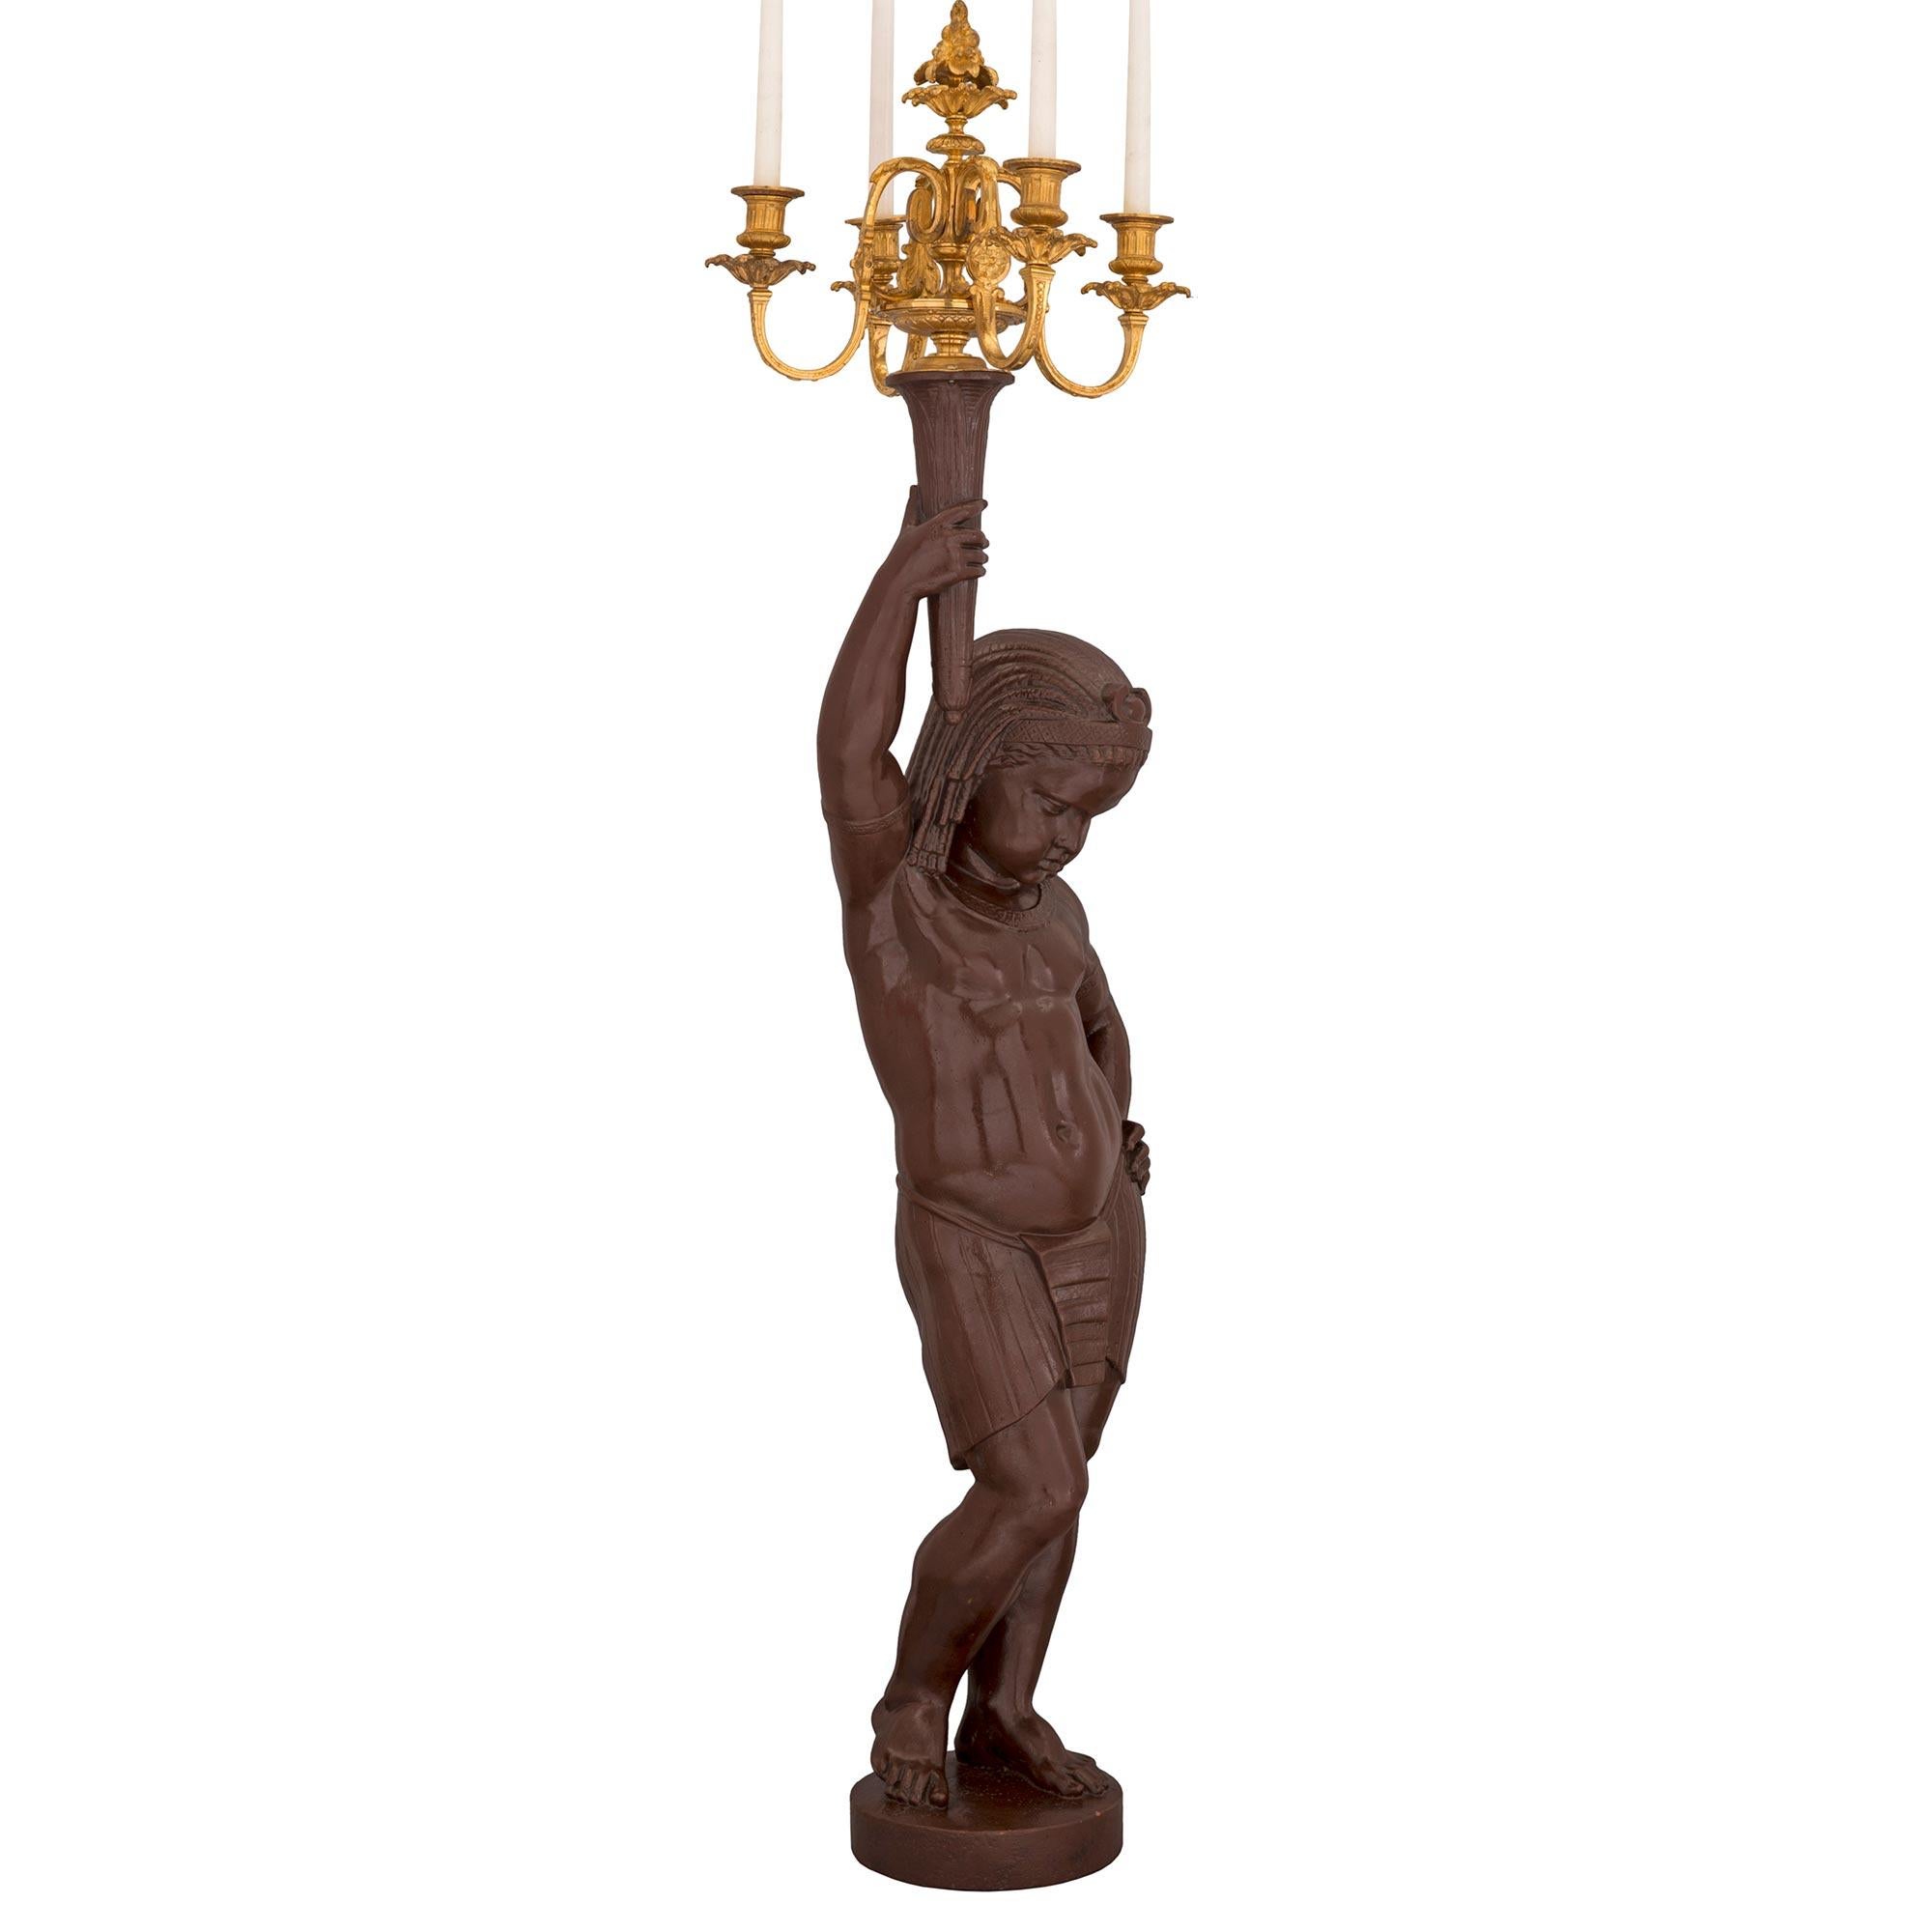 An extraordinary and large scale true pair of French mid 19th century patinated bronze and ormolu candelabra statues. Each impressive candelabra is raised by a circular base where the finely detailed figures of Nubians are standing. Each is dressed